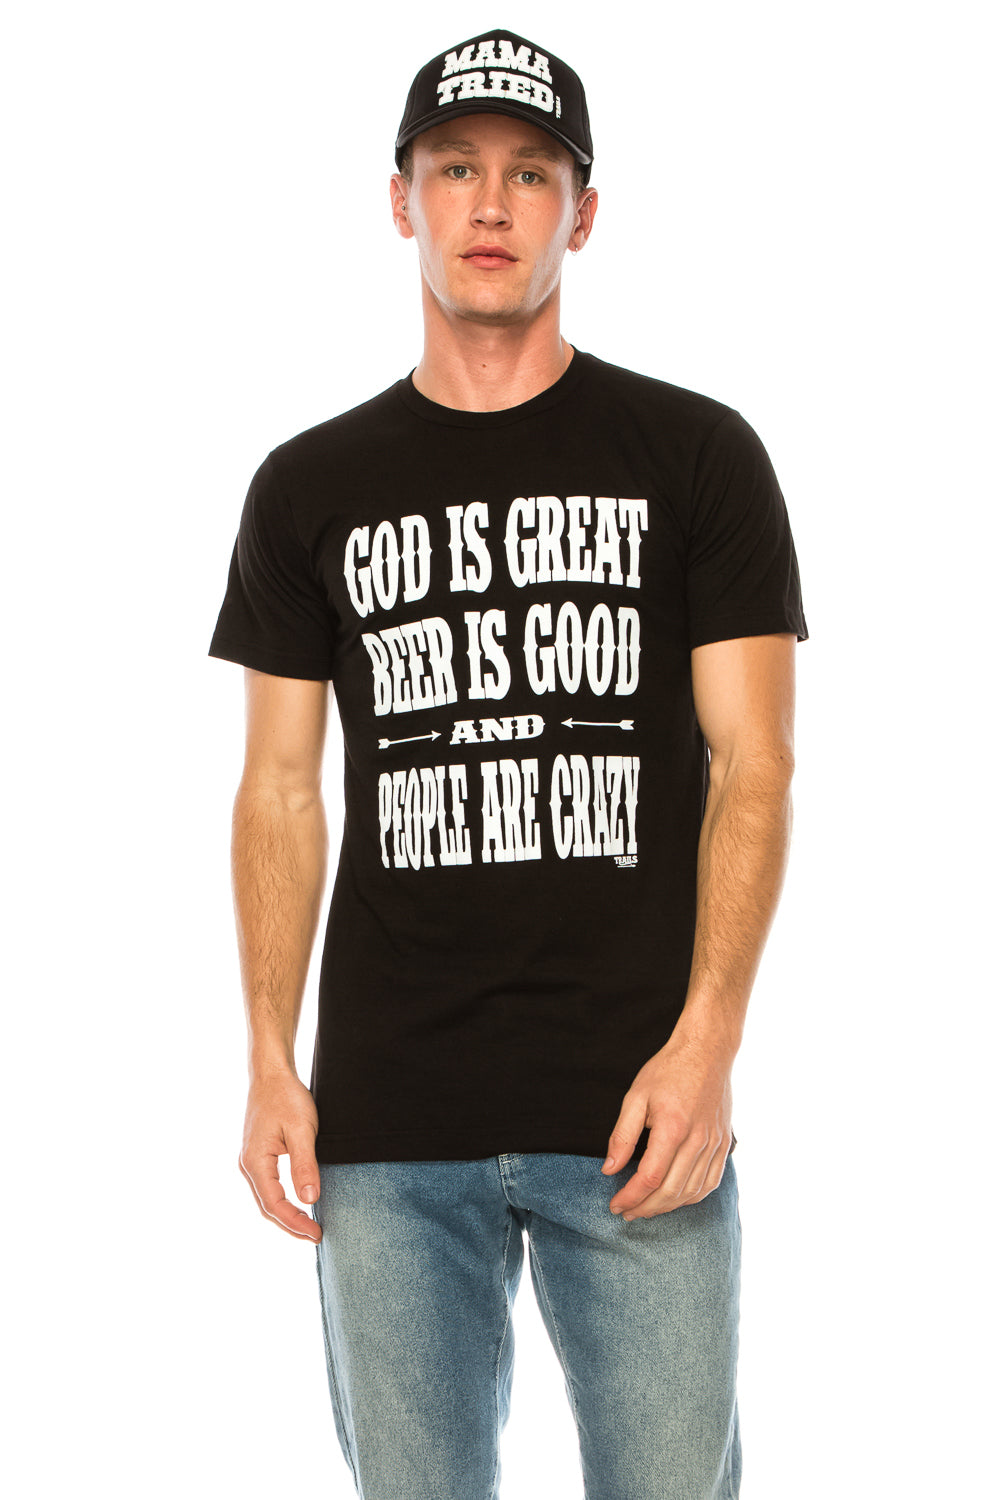 GOD IS GREAT BEER IS GOOD AND PEOPLE ARE CRAZY MEN'S T-SHIRT - Trailsclothing.com